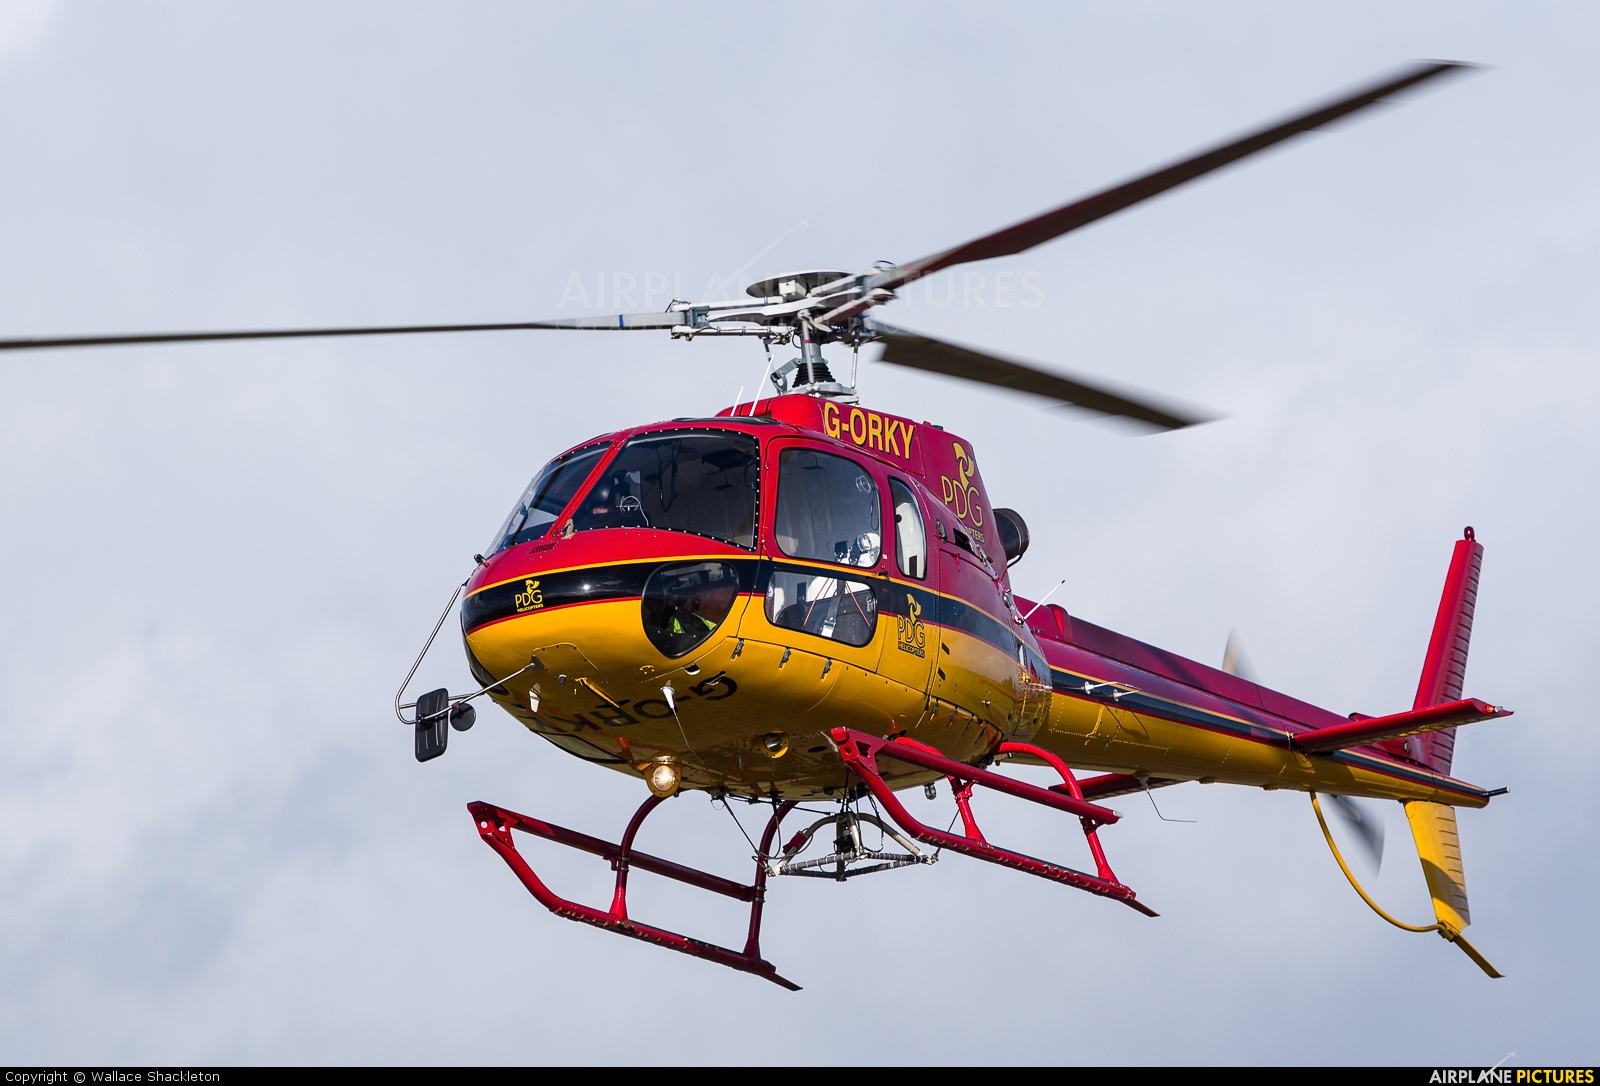 PLM Dollar Group / PDG Helicopters G-ORKY aircraft at Perth - Scone